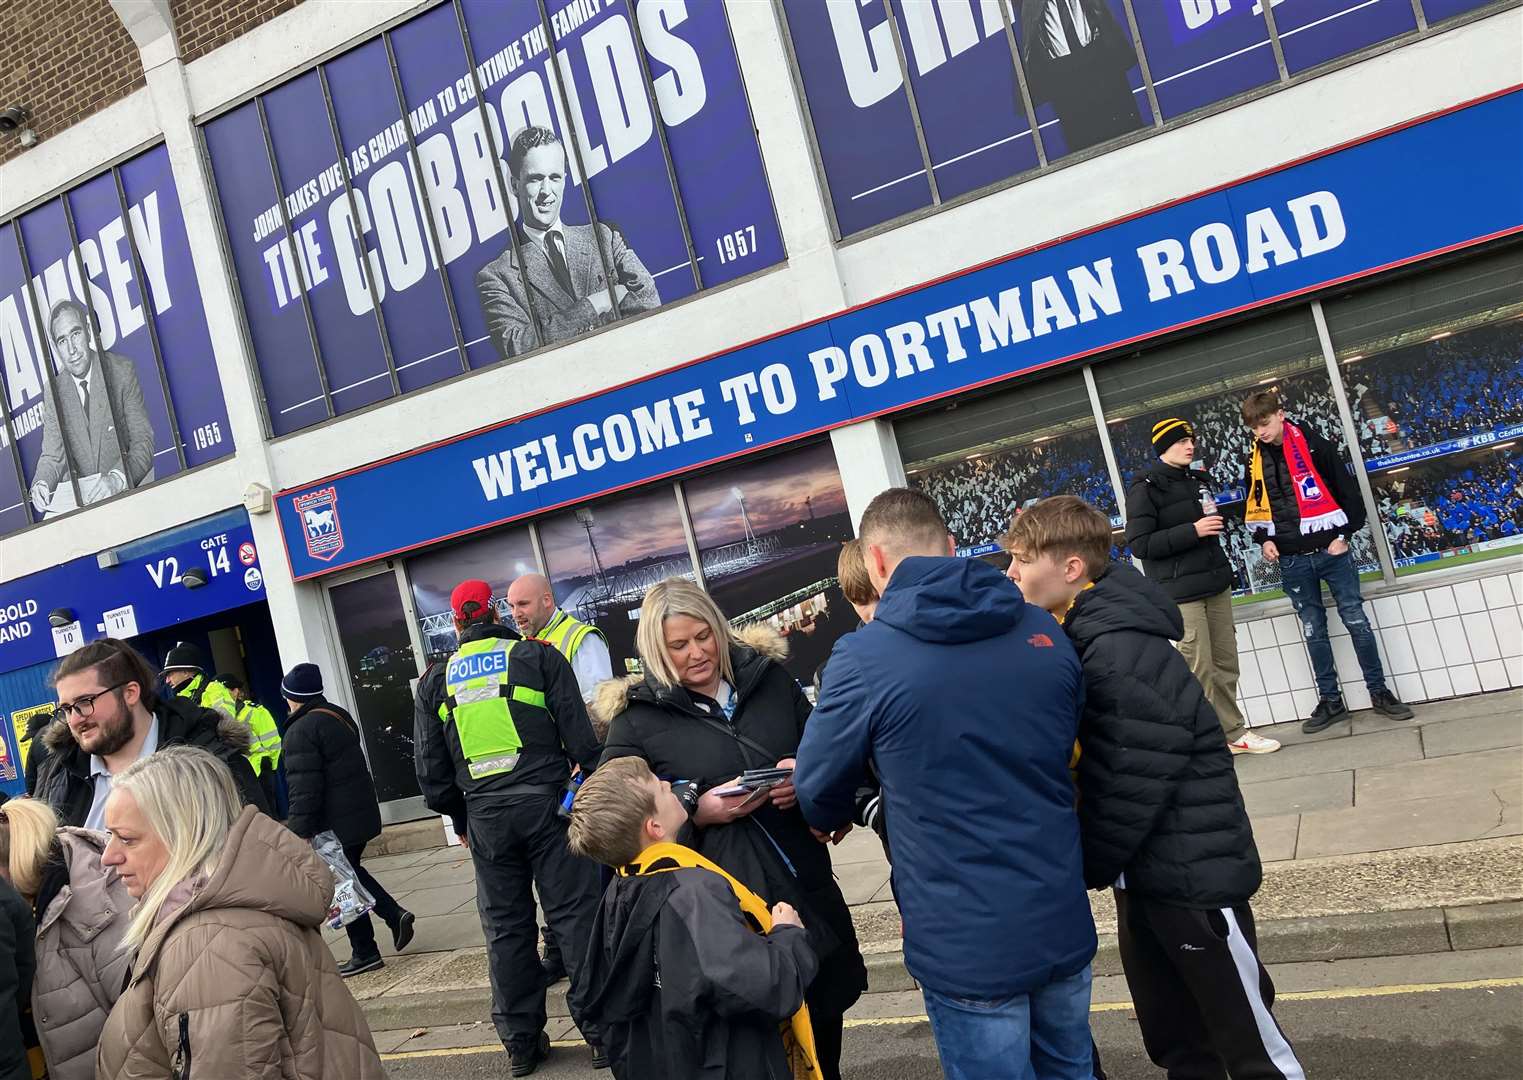 Stones supporters make their way to Portman Road